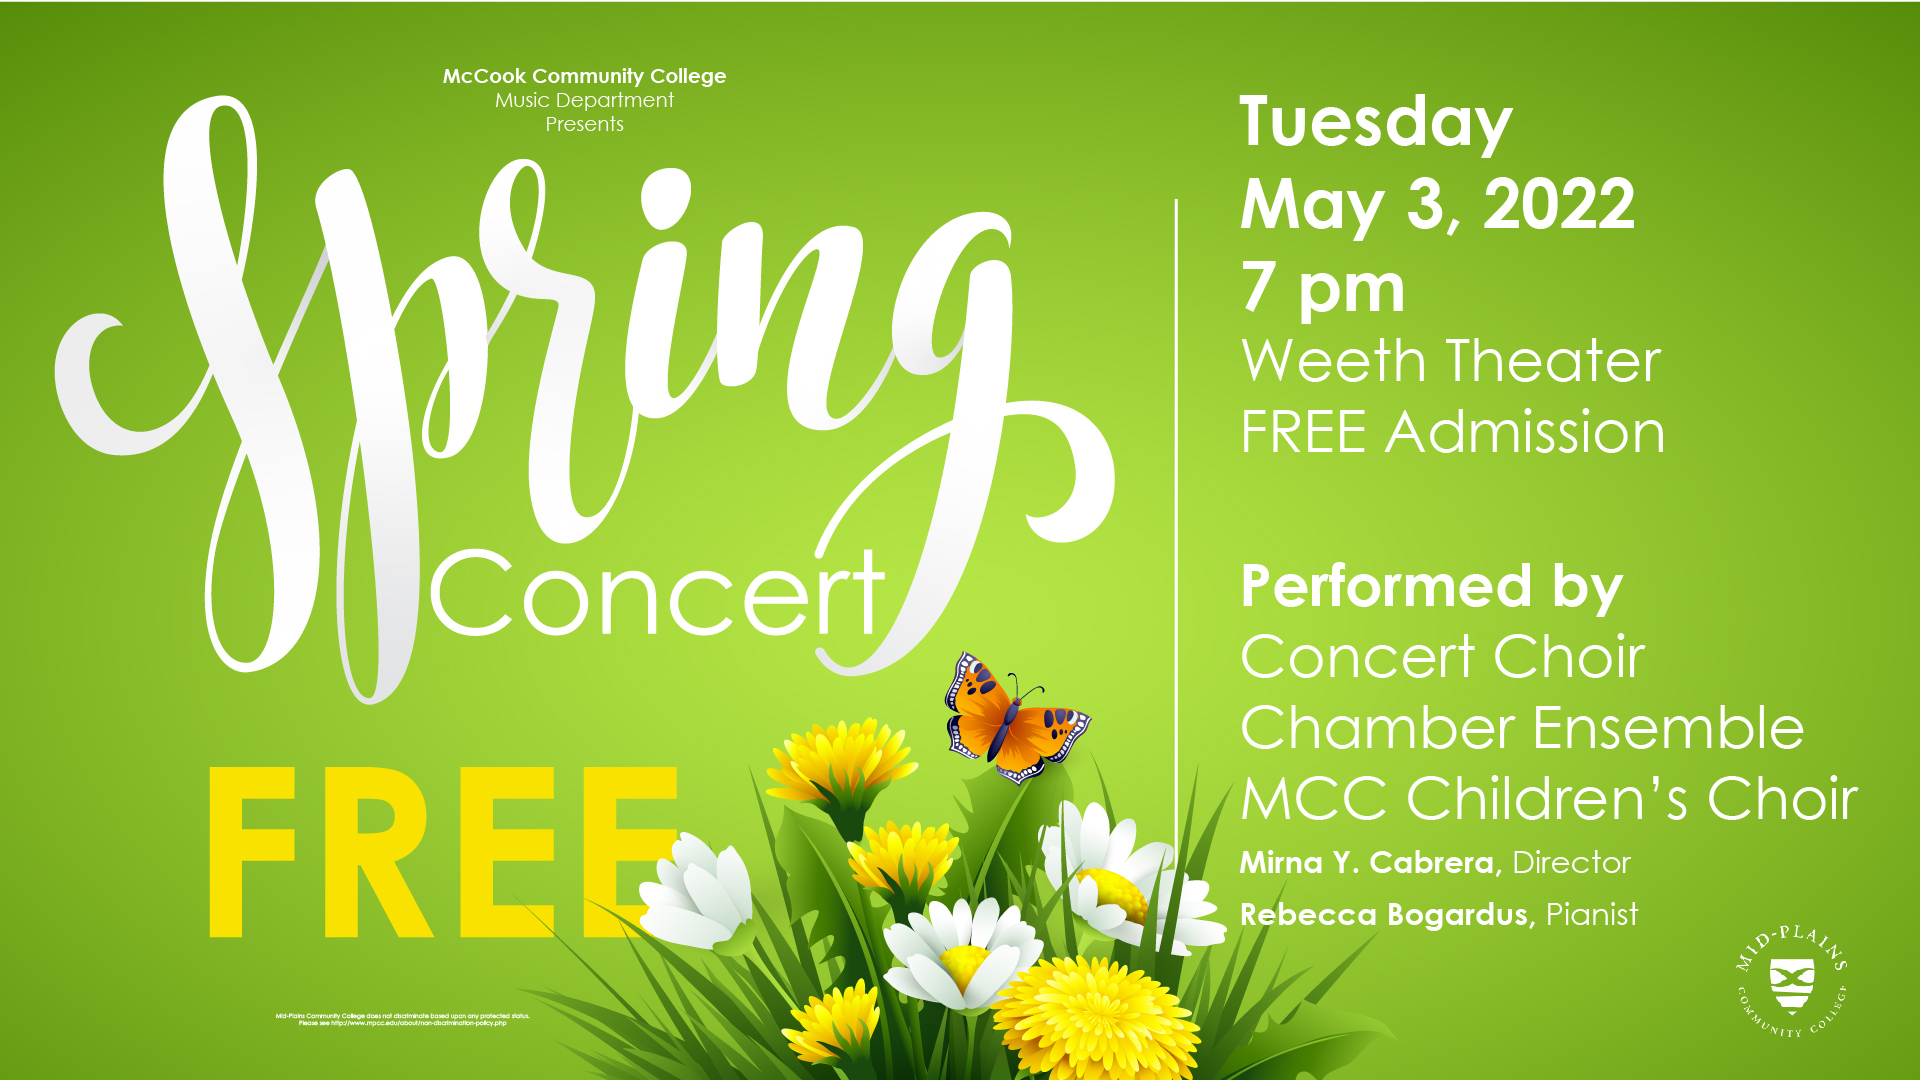 The McCook Community College Spring Concert is set for May 3 at 7 p.m.